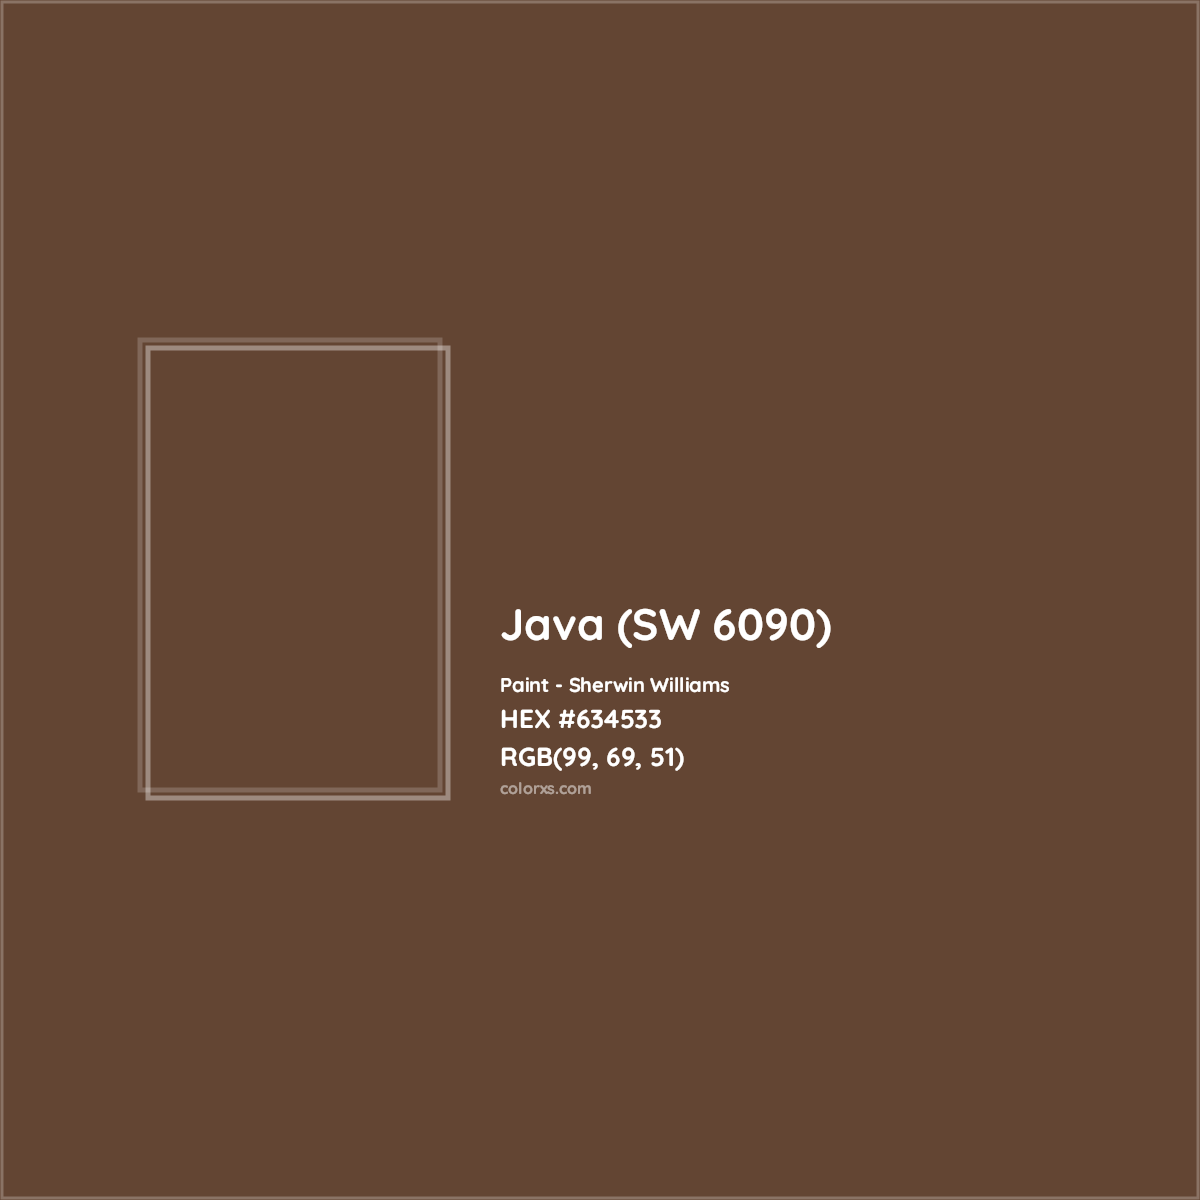 HEX #634533 Java (SW 6090) Paint Sherwin Williams - Color Code